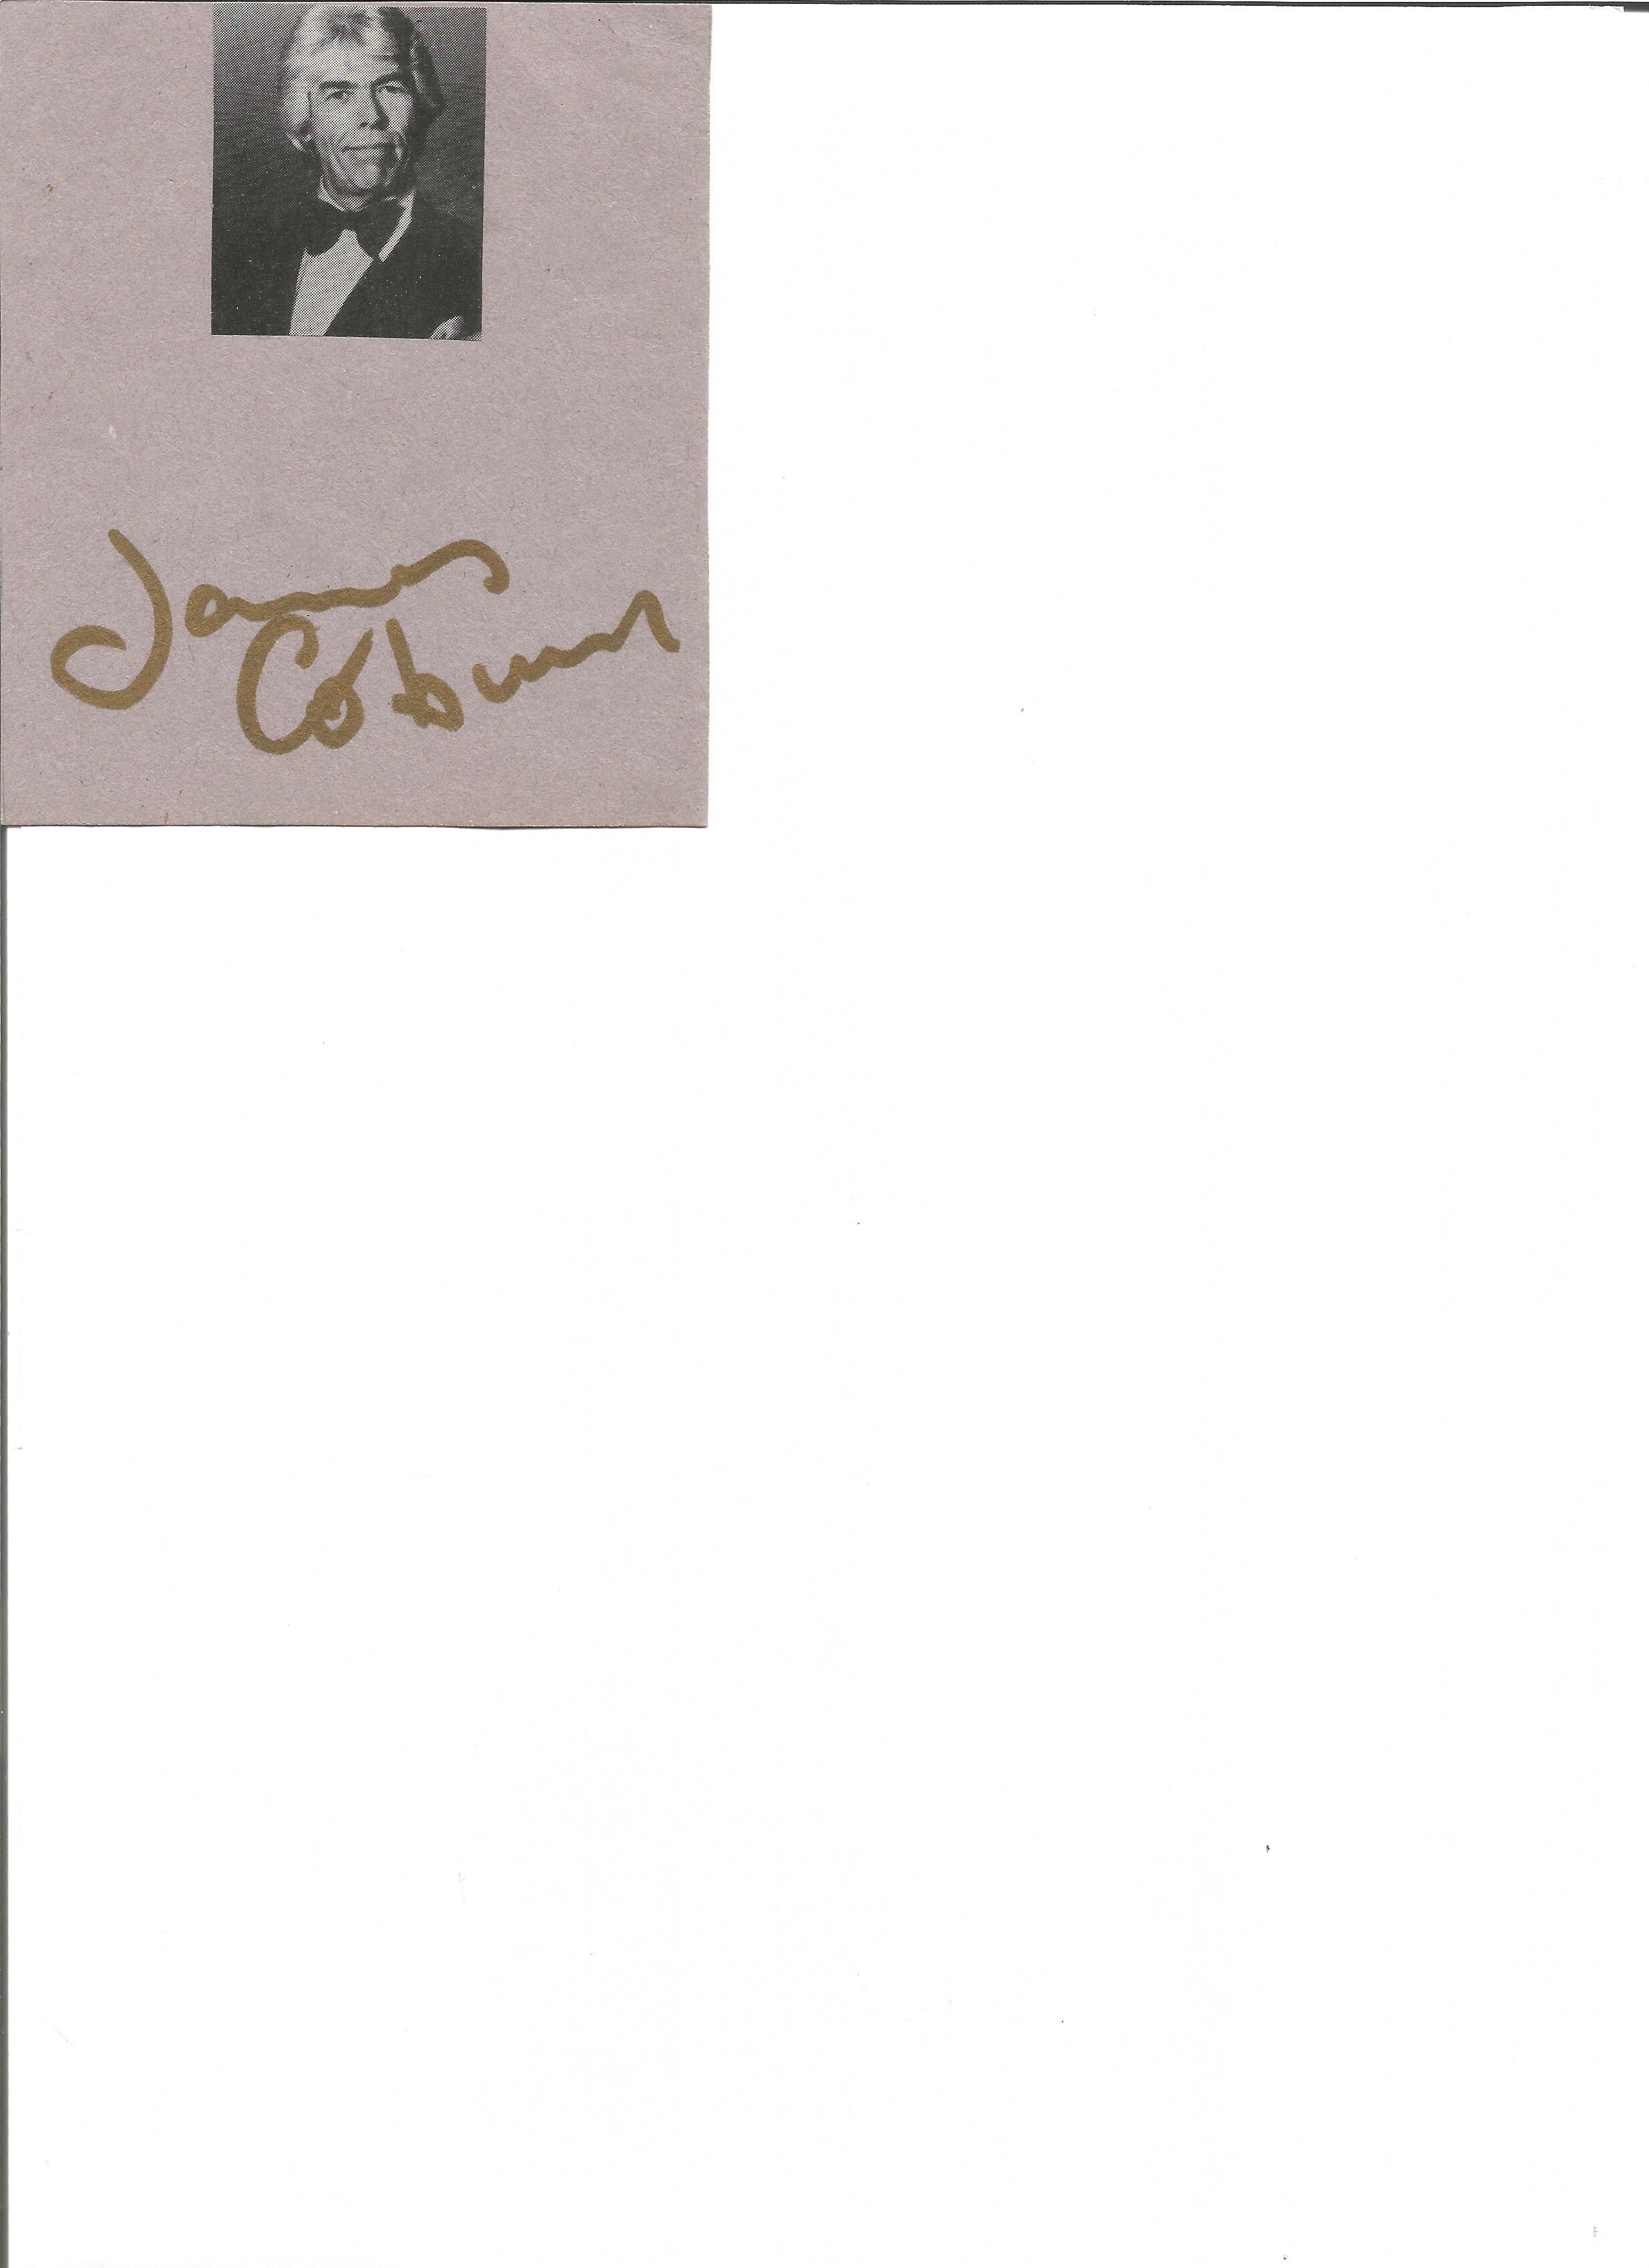 James Coburn signed 4x4 coloured card. August 31, 1928 – November 18, 2002 was an American actor. He